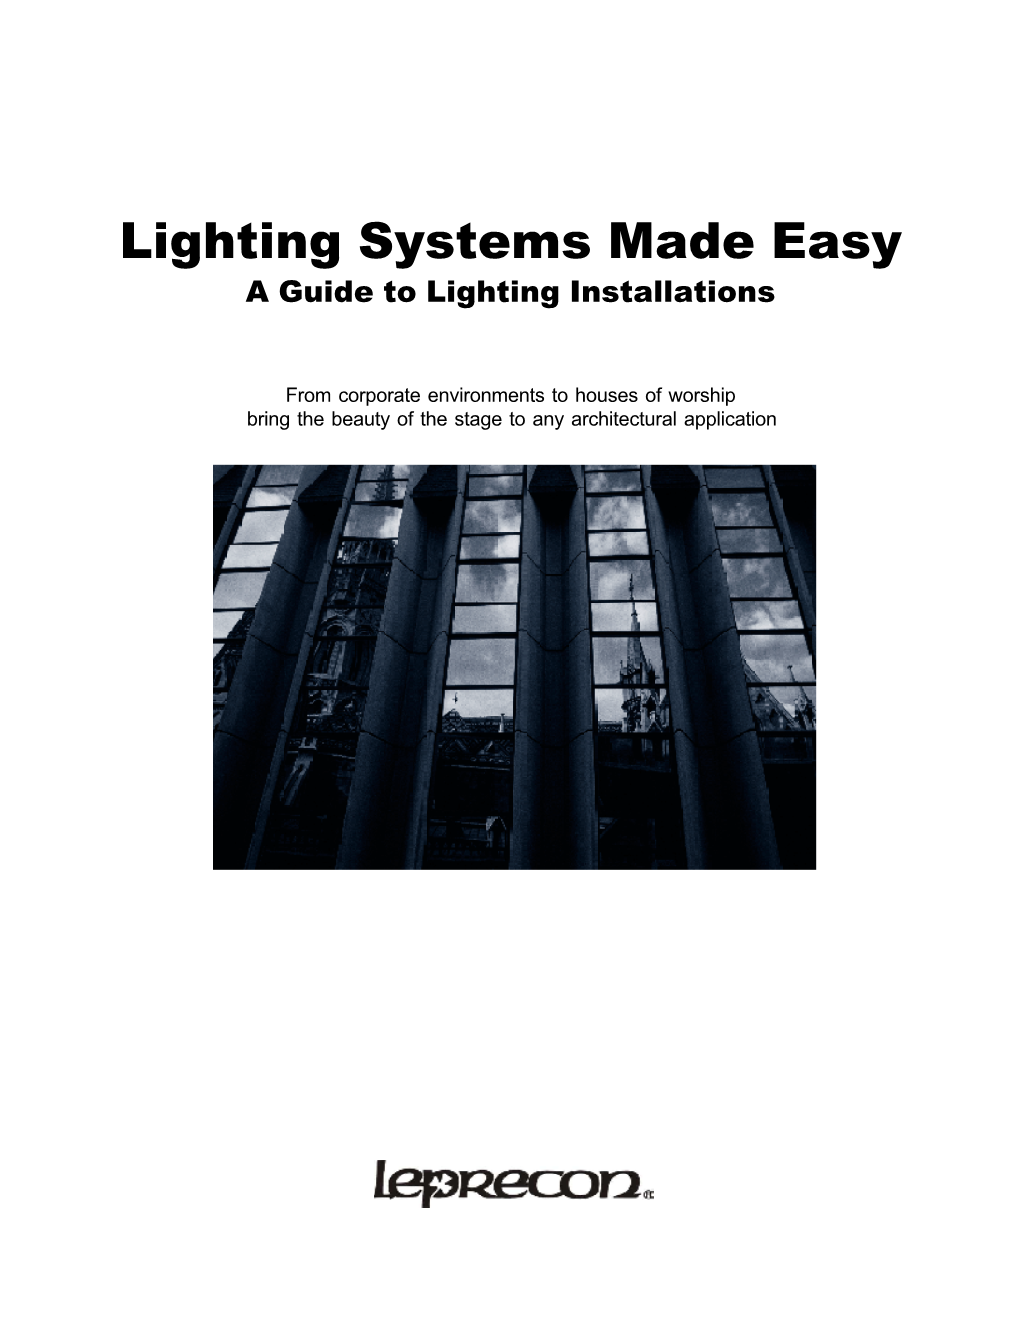 Lighting Systems Made Easy a Guide to Lighting Installations